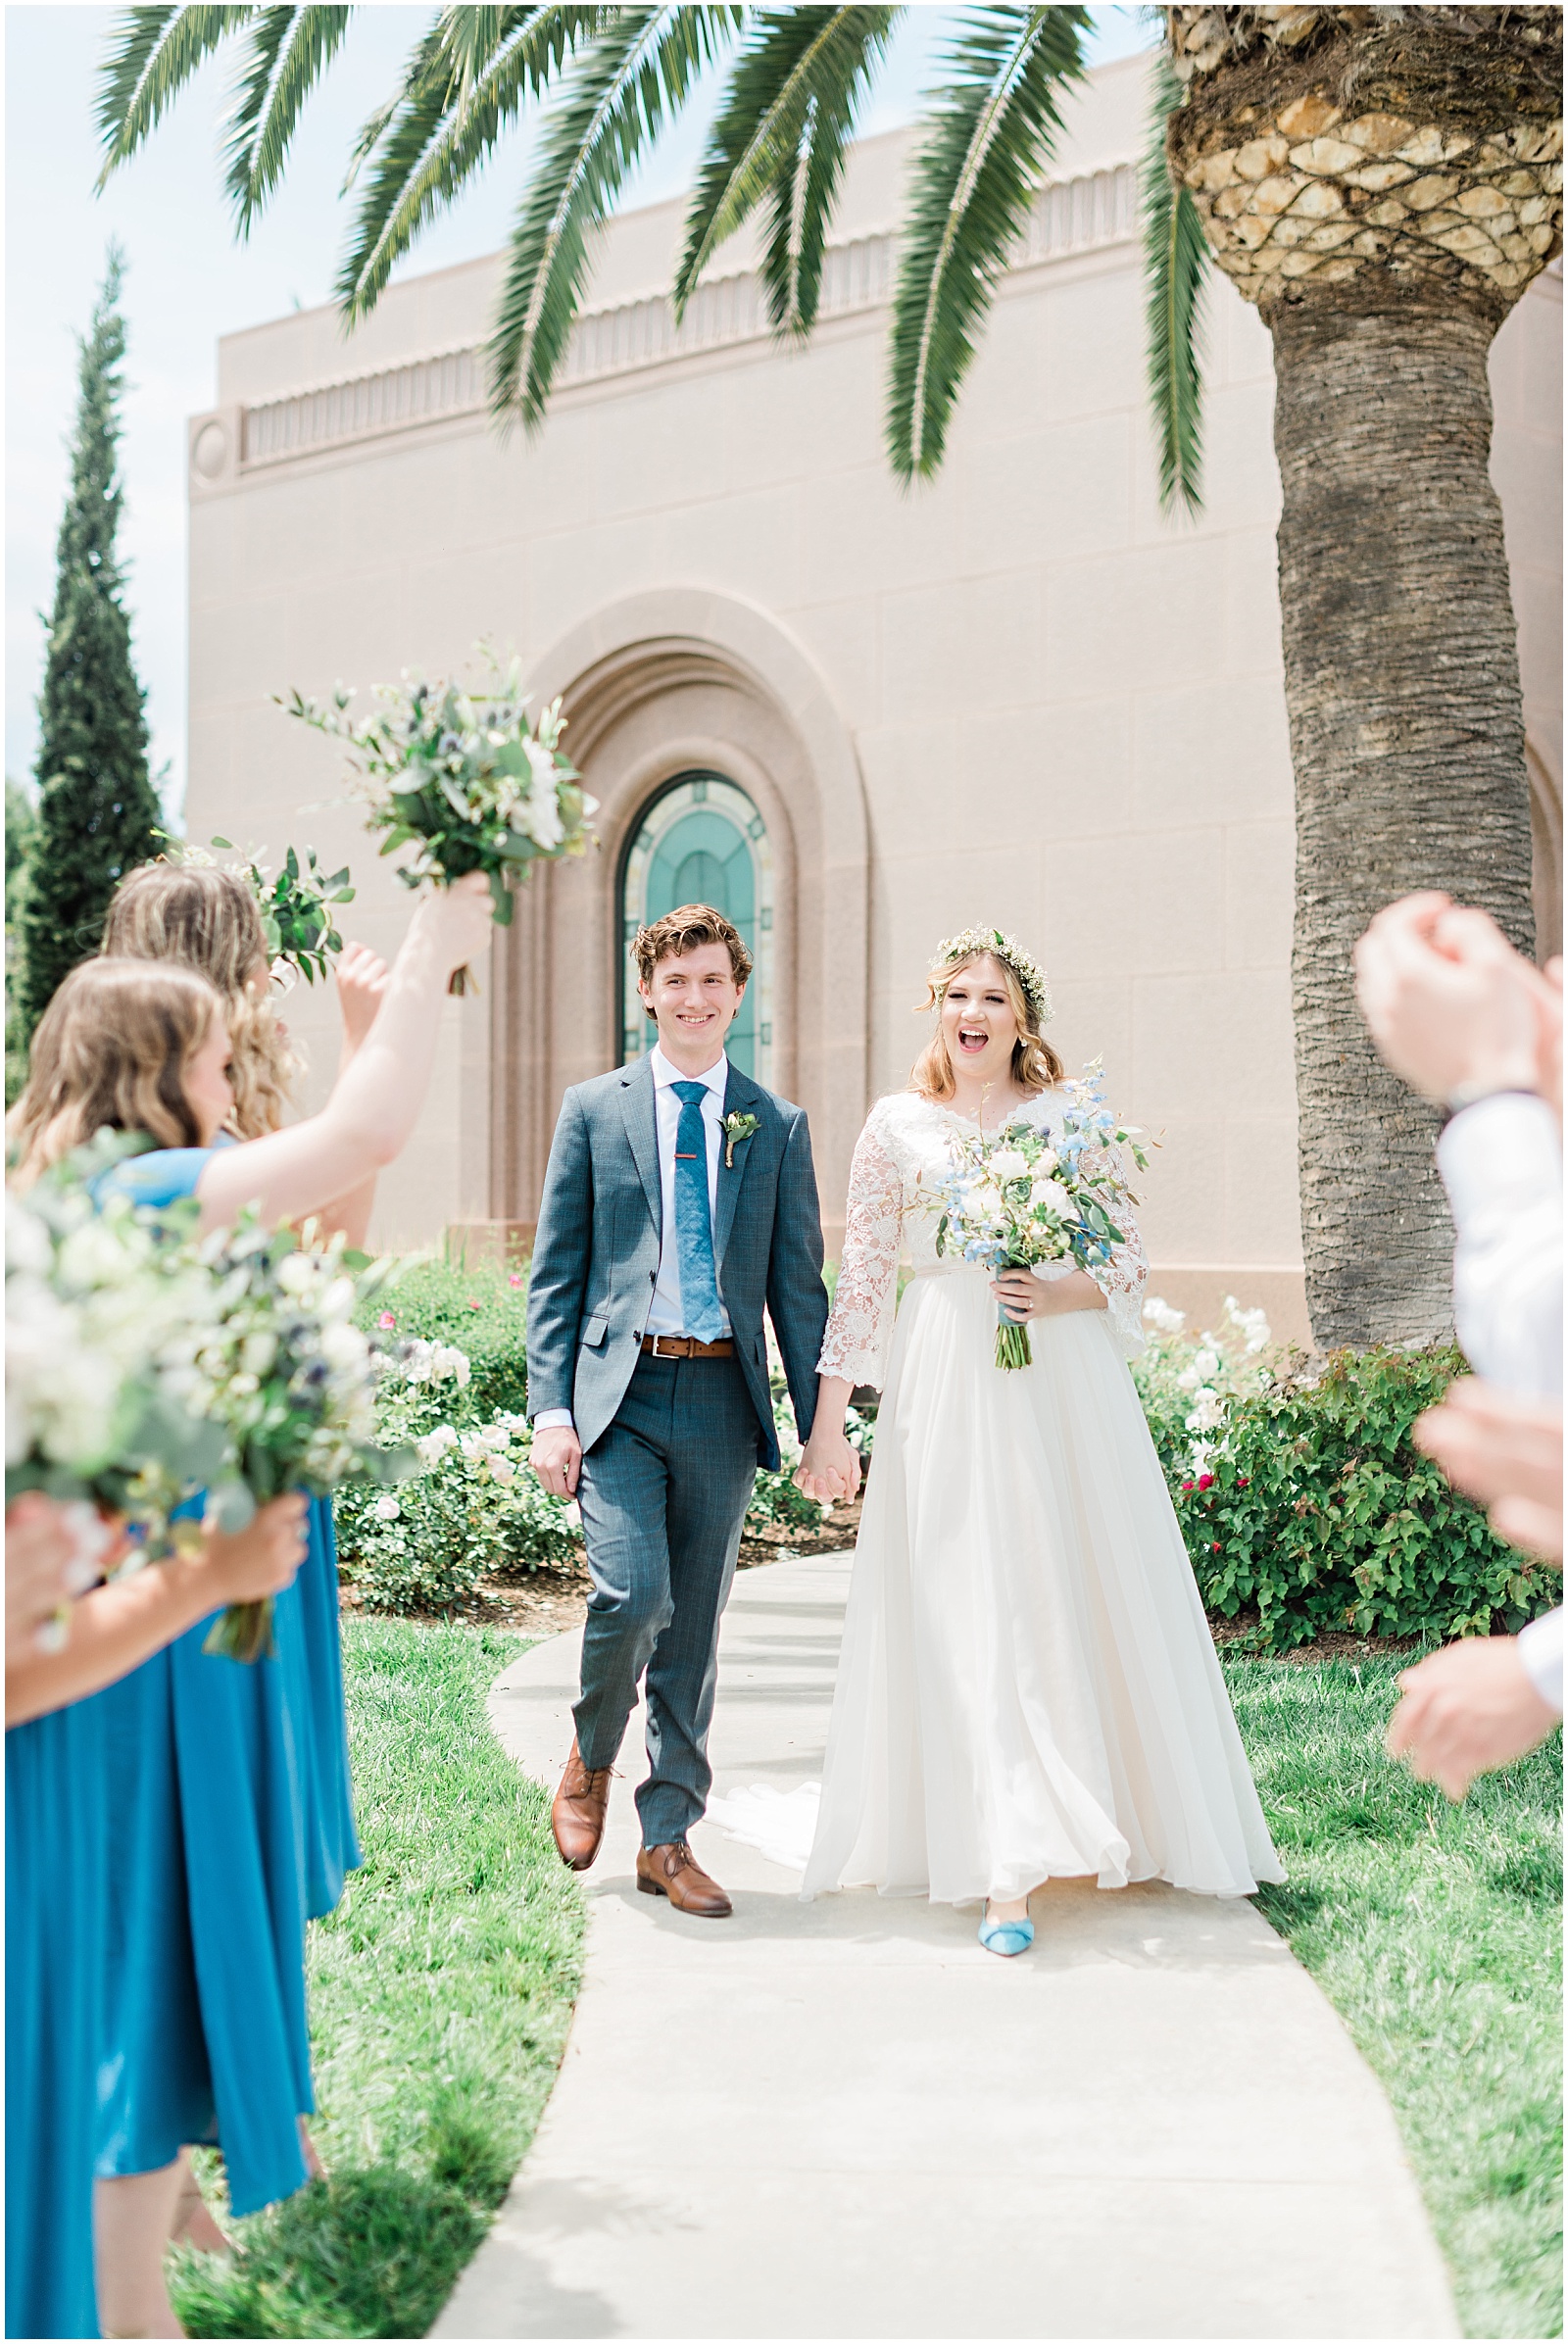 Newport Beach Temple Wedding. Images by Mollie Jane Photography. To see more, go to www.molliejanephotography.com.